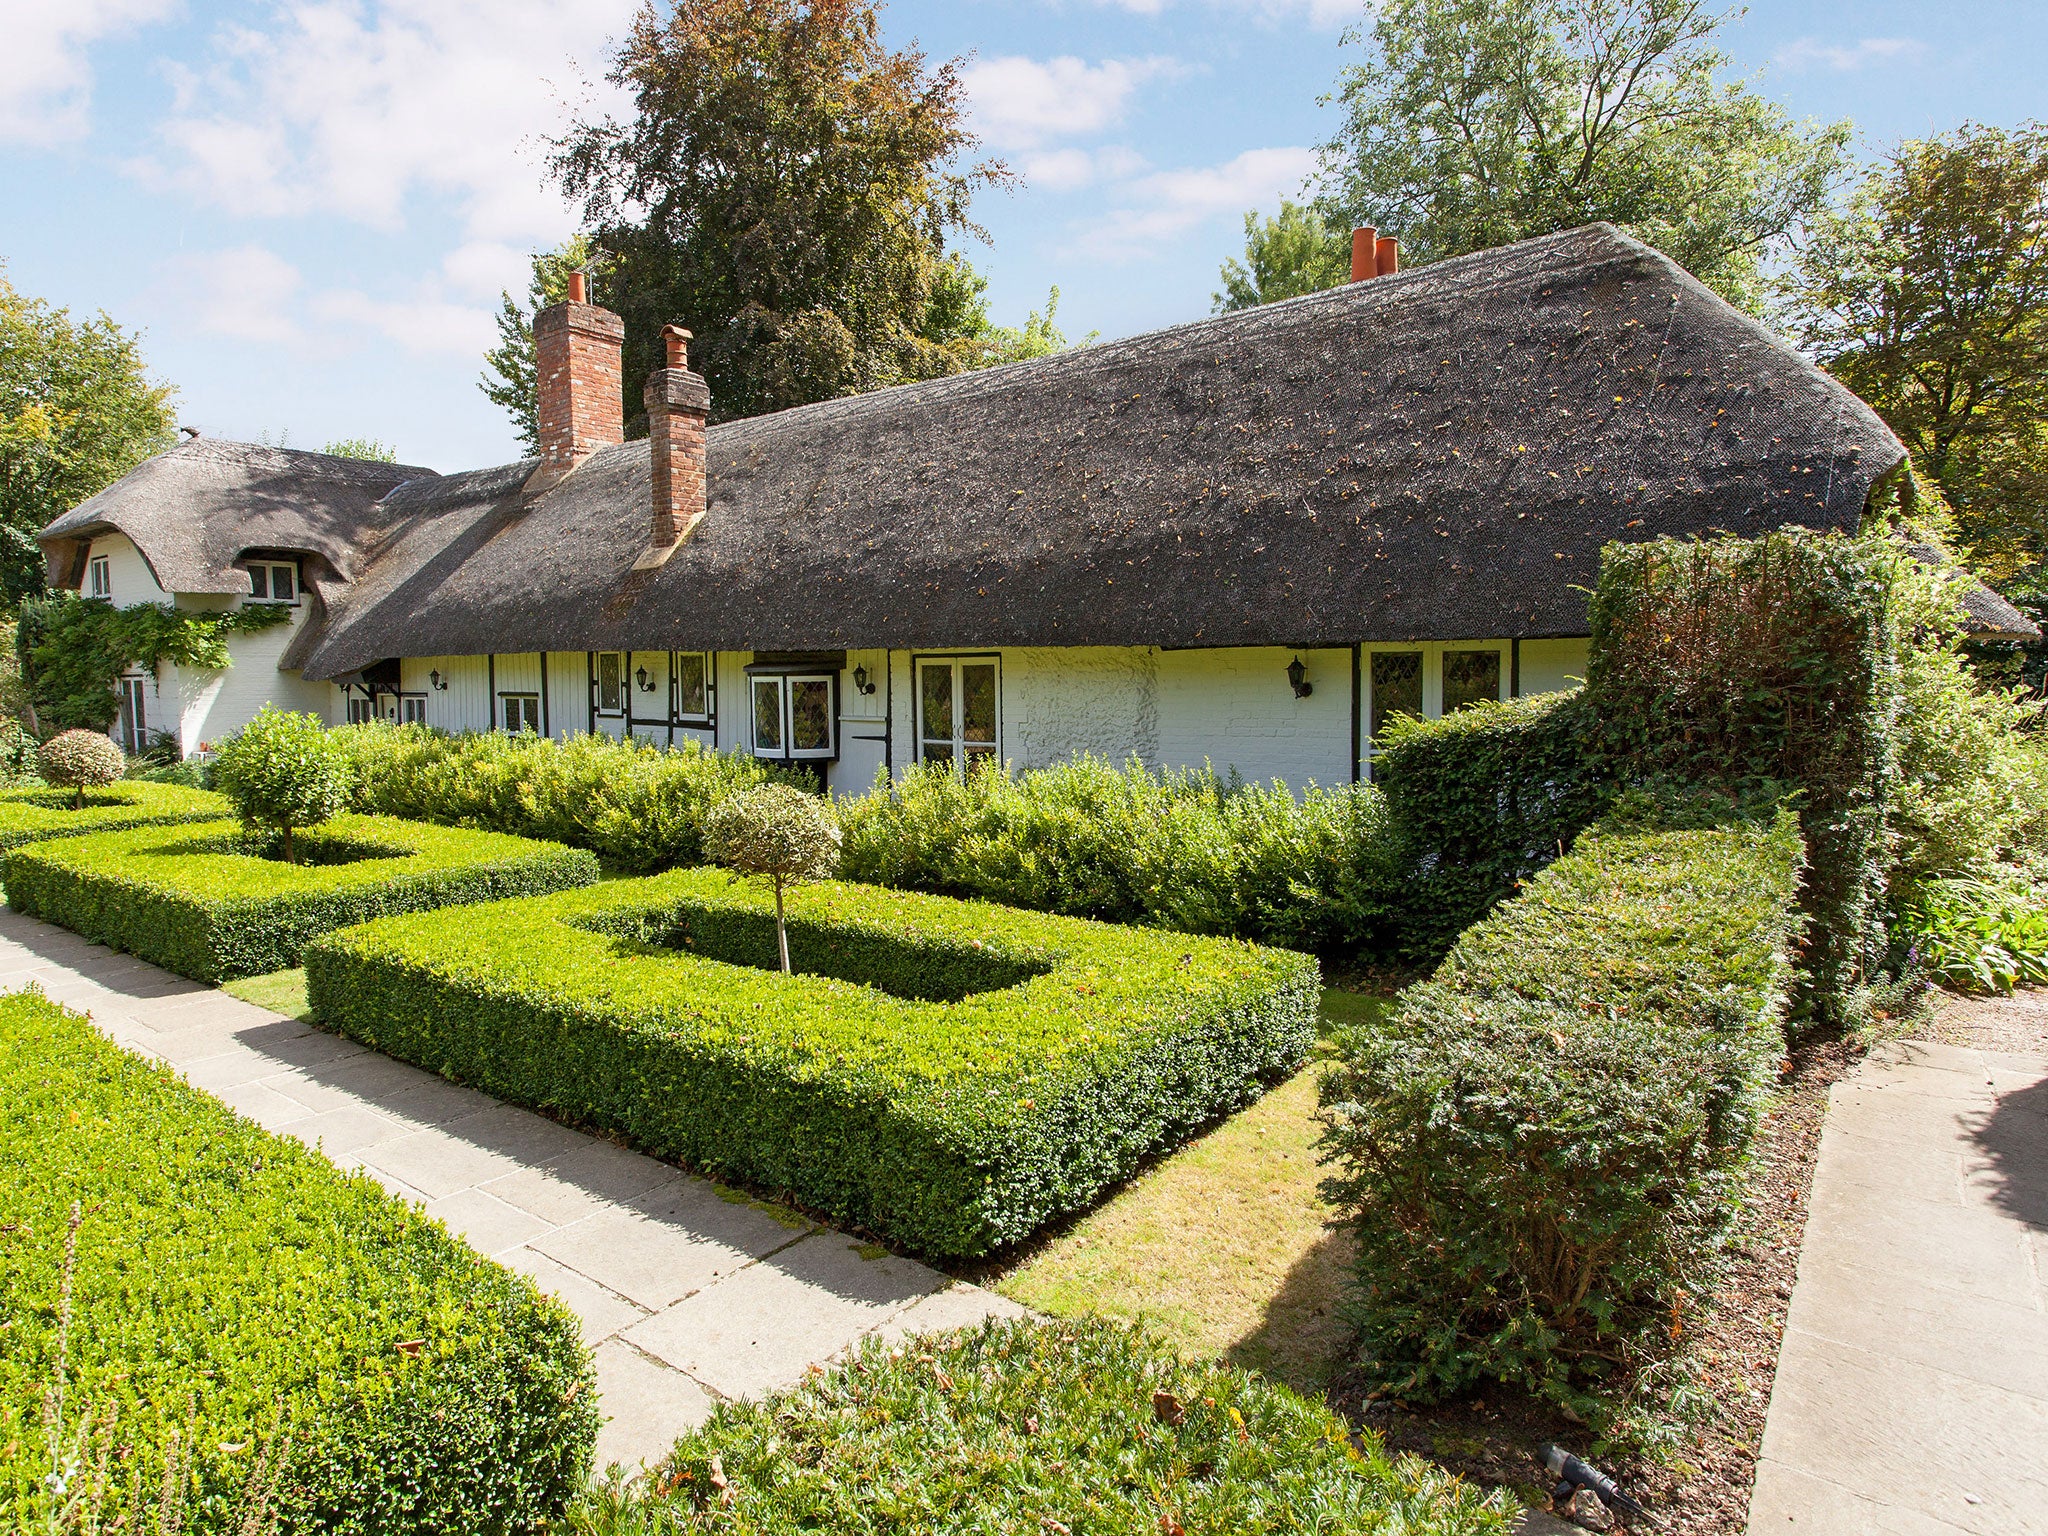 Enid Blyton wrote some of her most-loved children's stories in Old Thatch